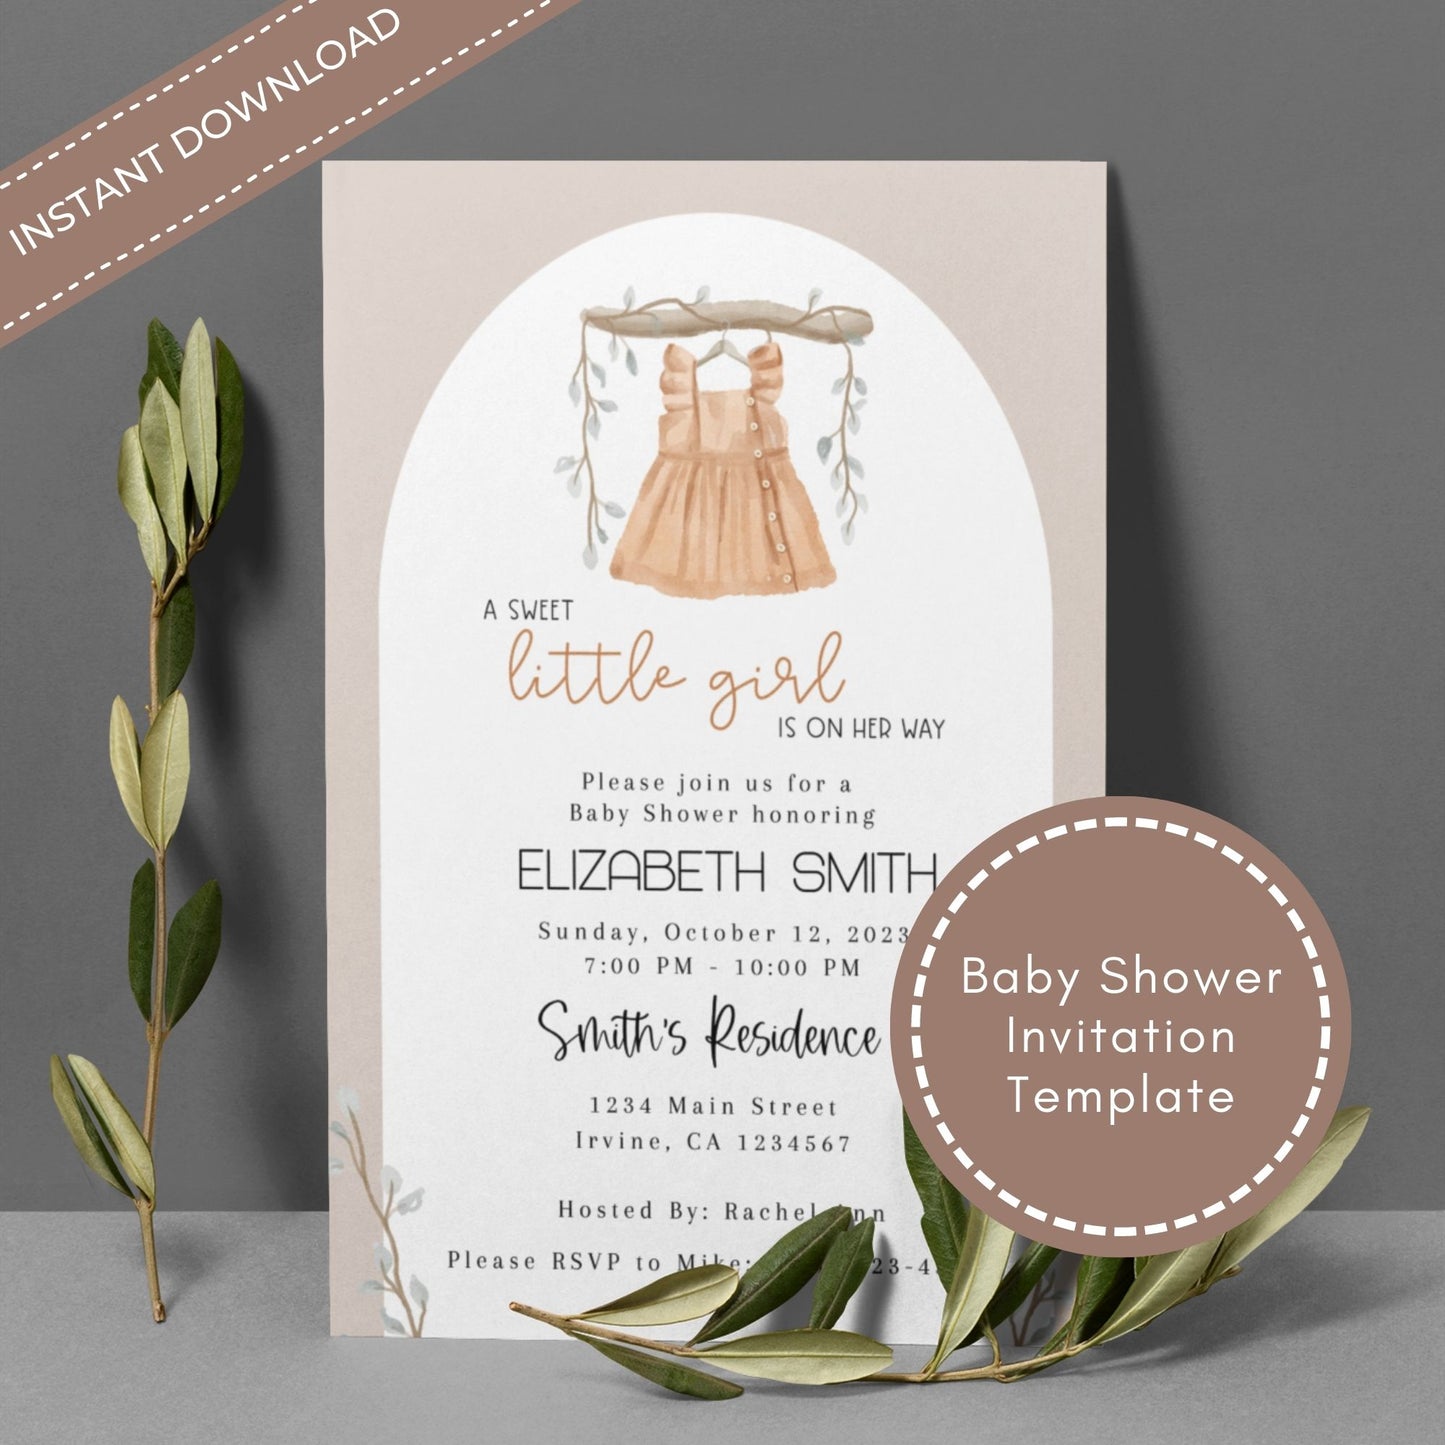 A Sweet Little Girl is On Her Way Baby Shower Invitation Template